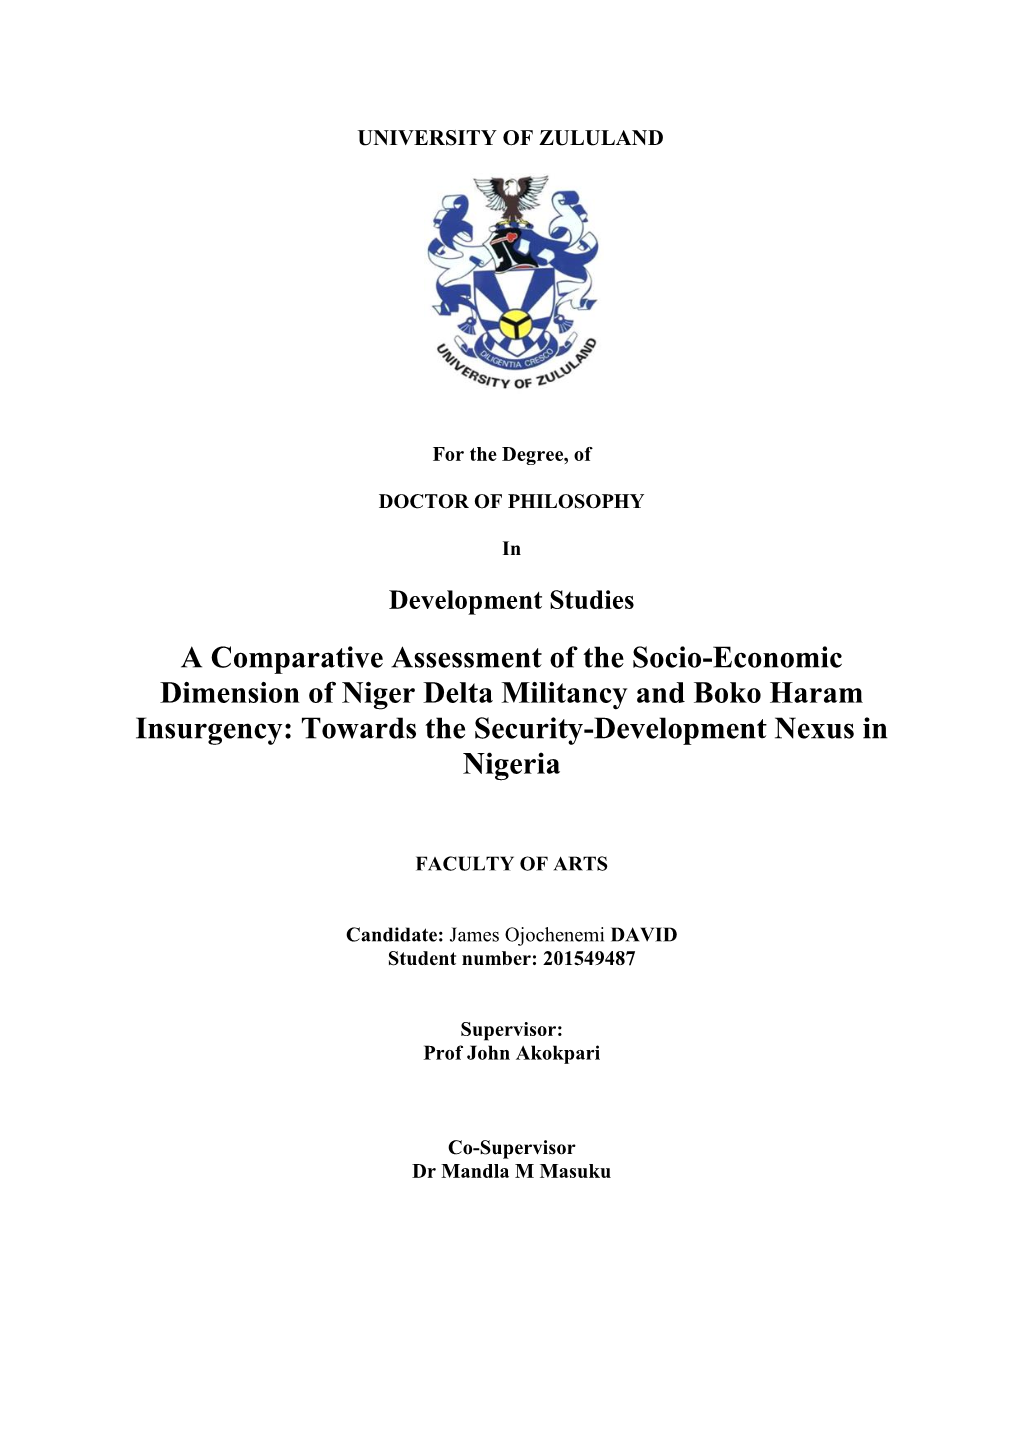 A Comparative Assessment of the Socio-Economic Dimension of Niger Delta Militancy and Boko Haram Insurgency: Towards the Security-Development Nexus in Nigeria